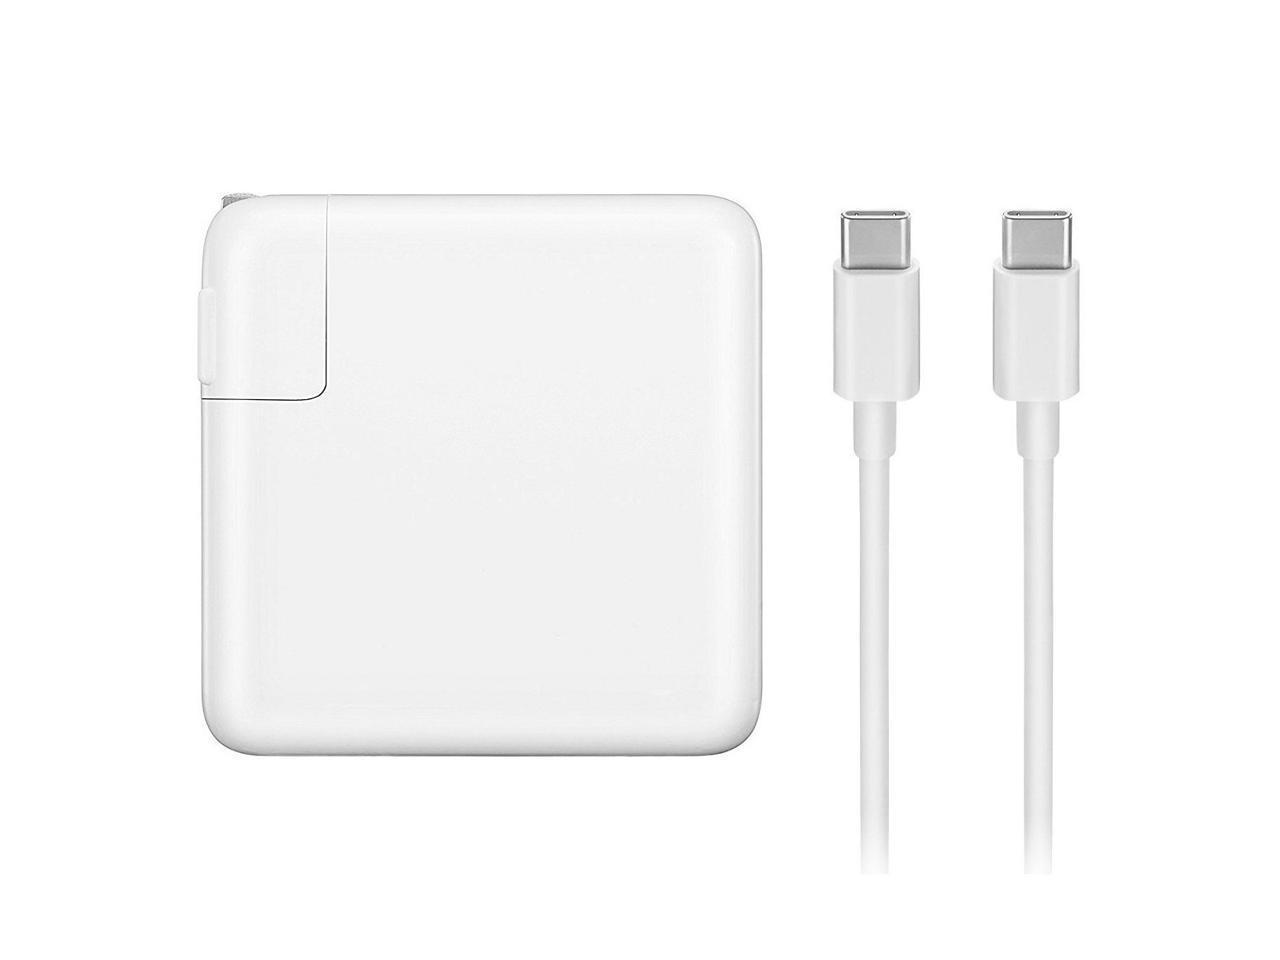 HF-30WUC: HF-30WUC: 30W USB C Power Adapter, Compatible with MacBook, MacBook Air Charger iPad Pro, Pixel, Galaxy, Works with PD 30W 29W 20W, Included USB-C to USB-C Charge Cable 2meter